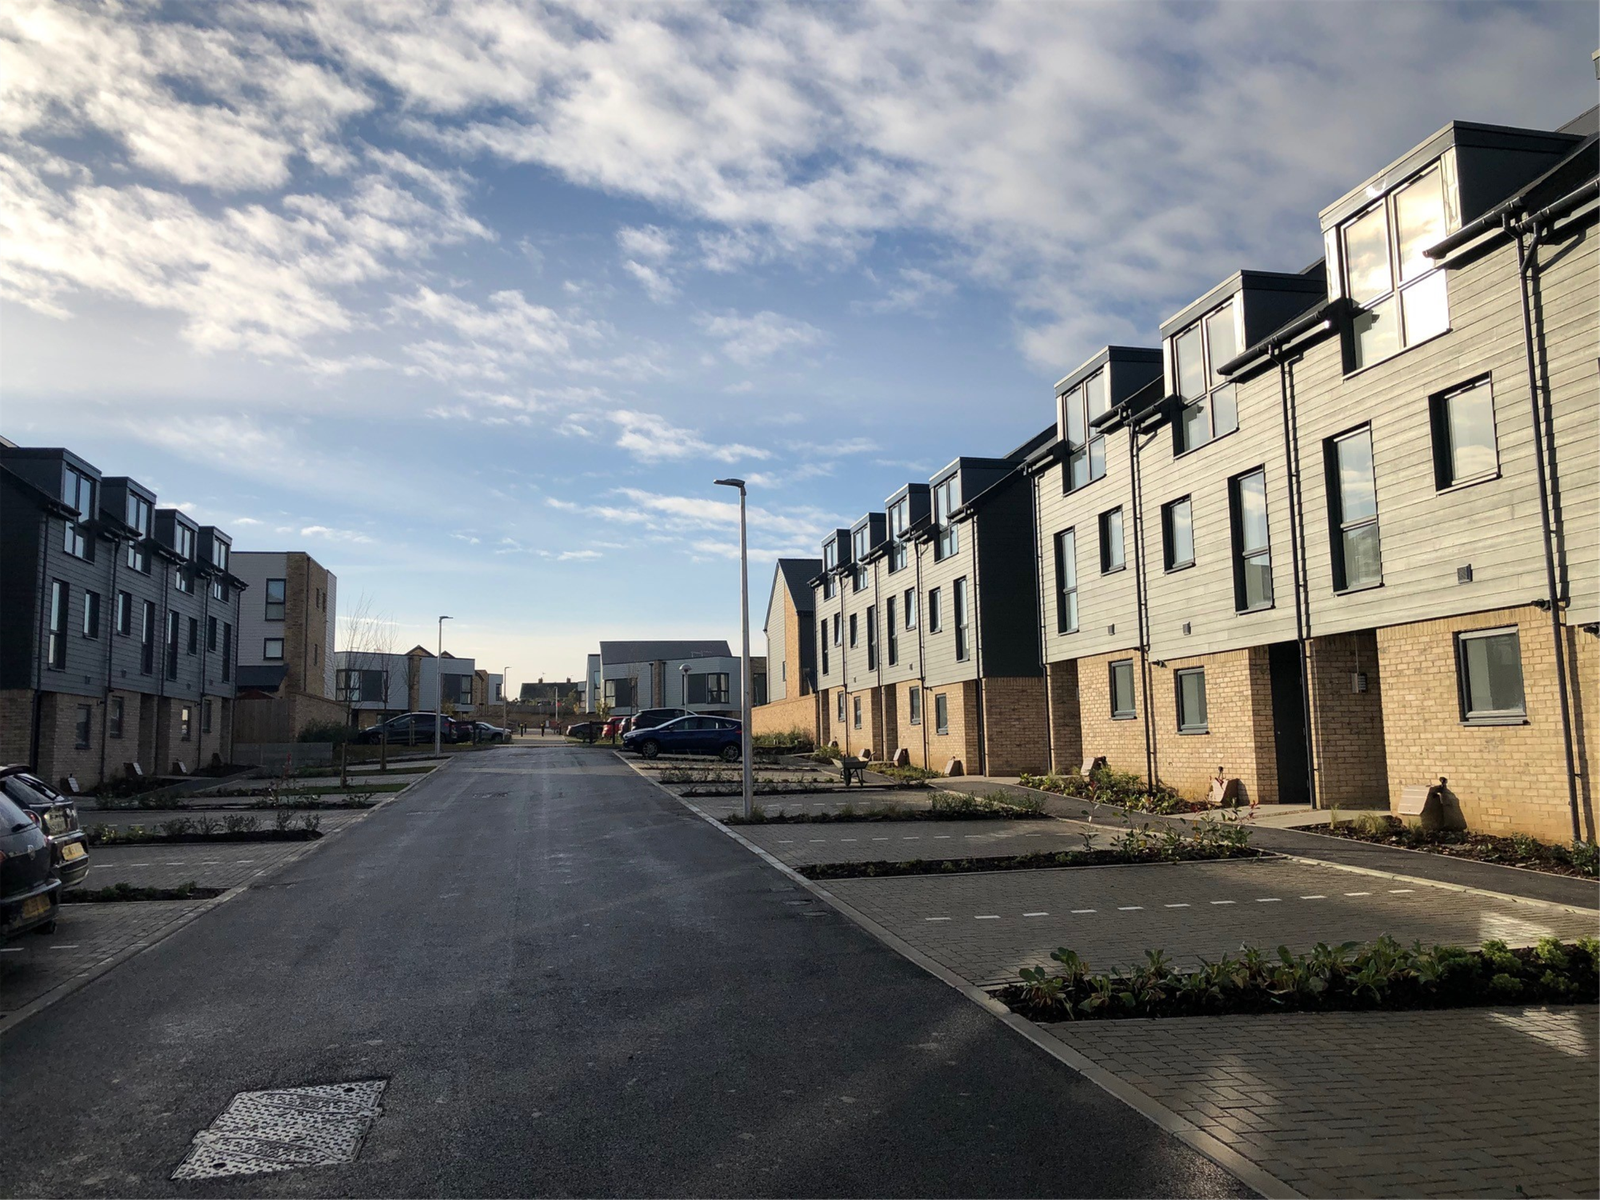 Image showing new three-bedroom houses for social rent in Rainham